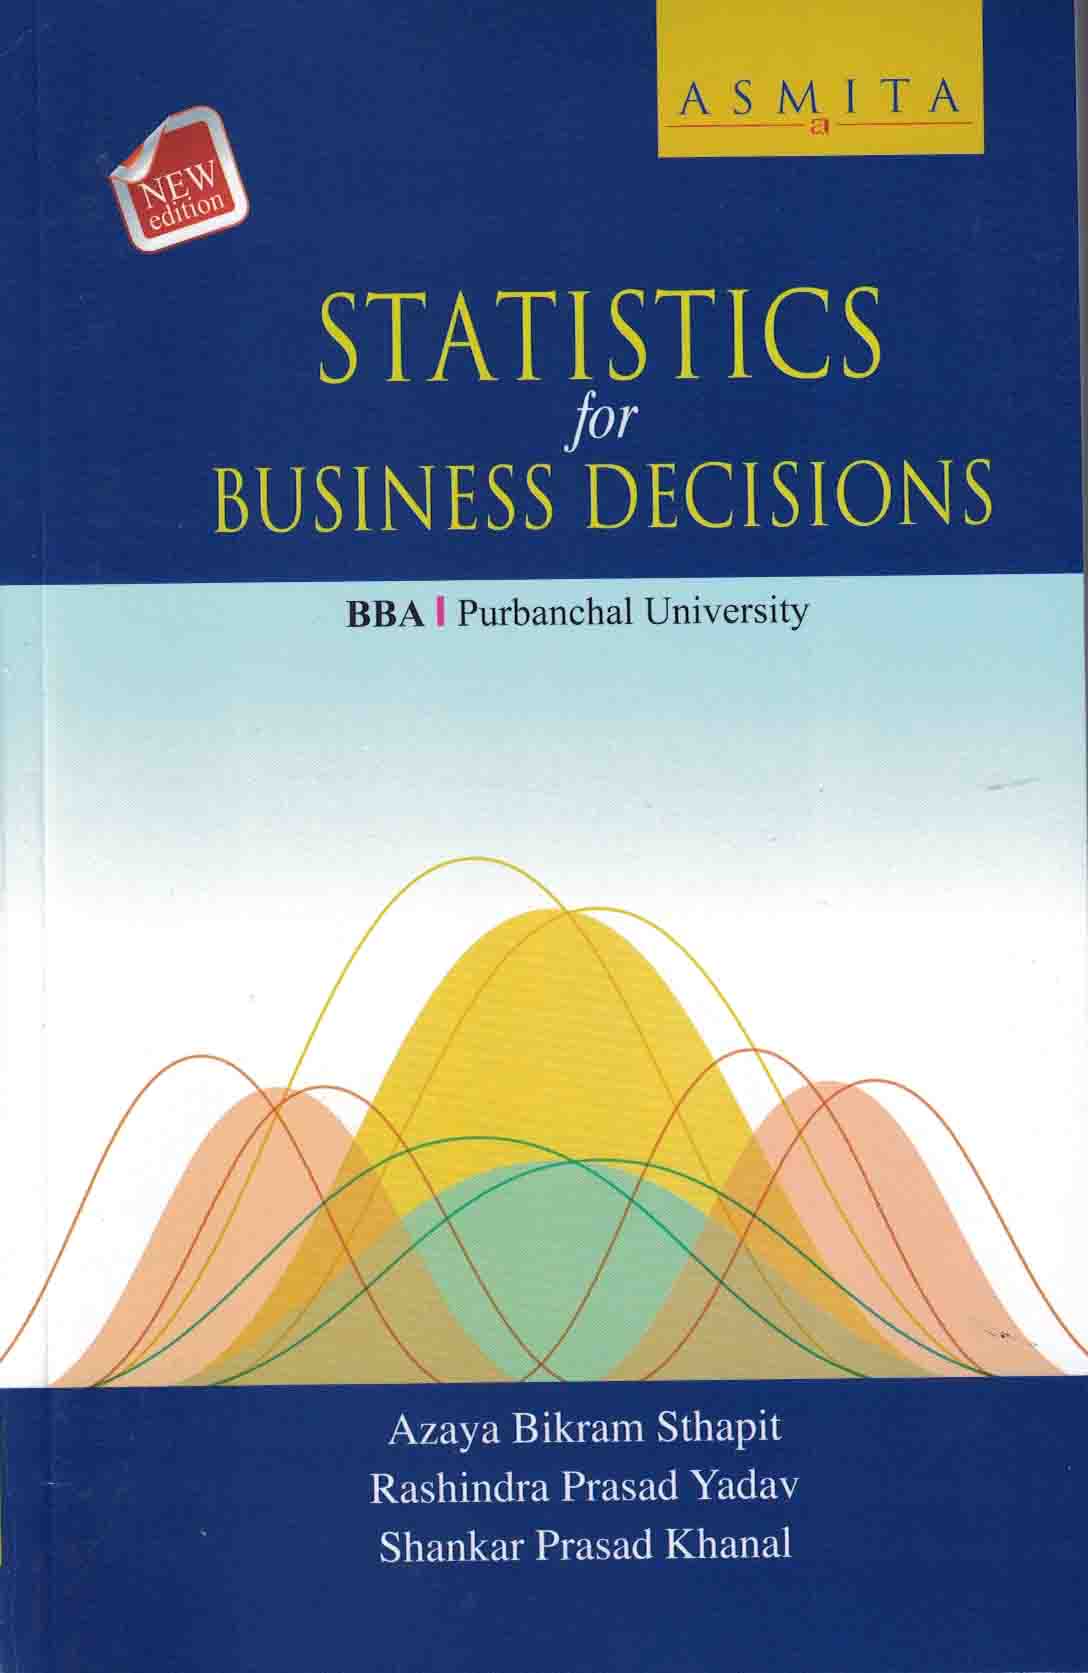 Statistics for Business Decisions- BBA 2nd - Purbanchal University